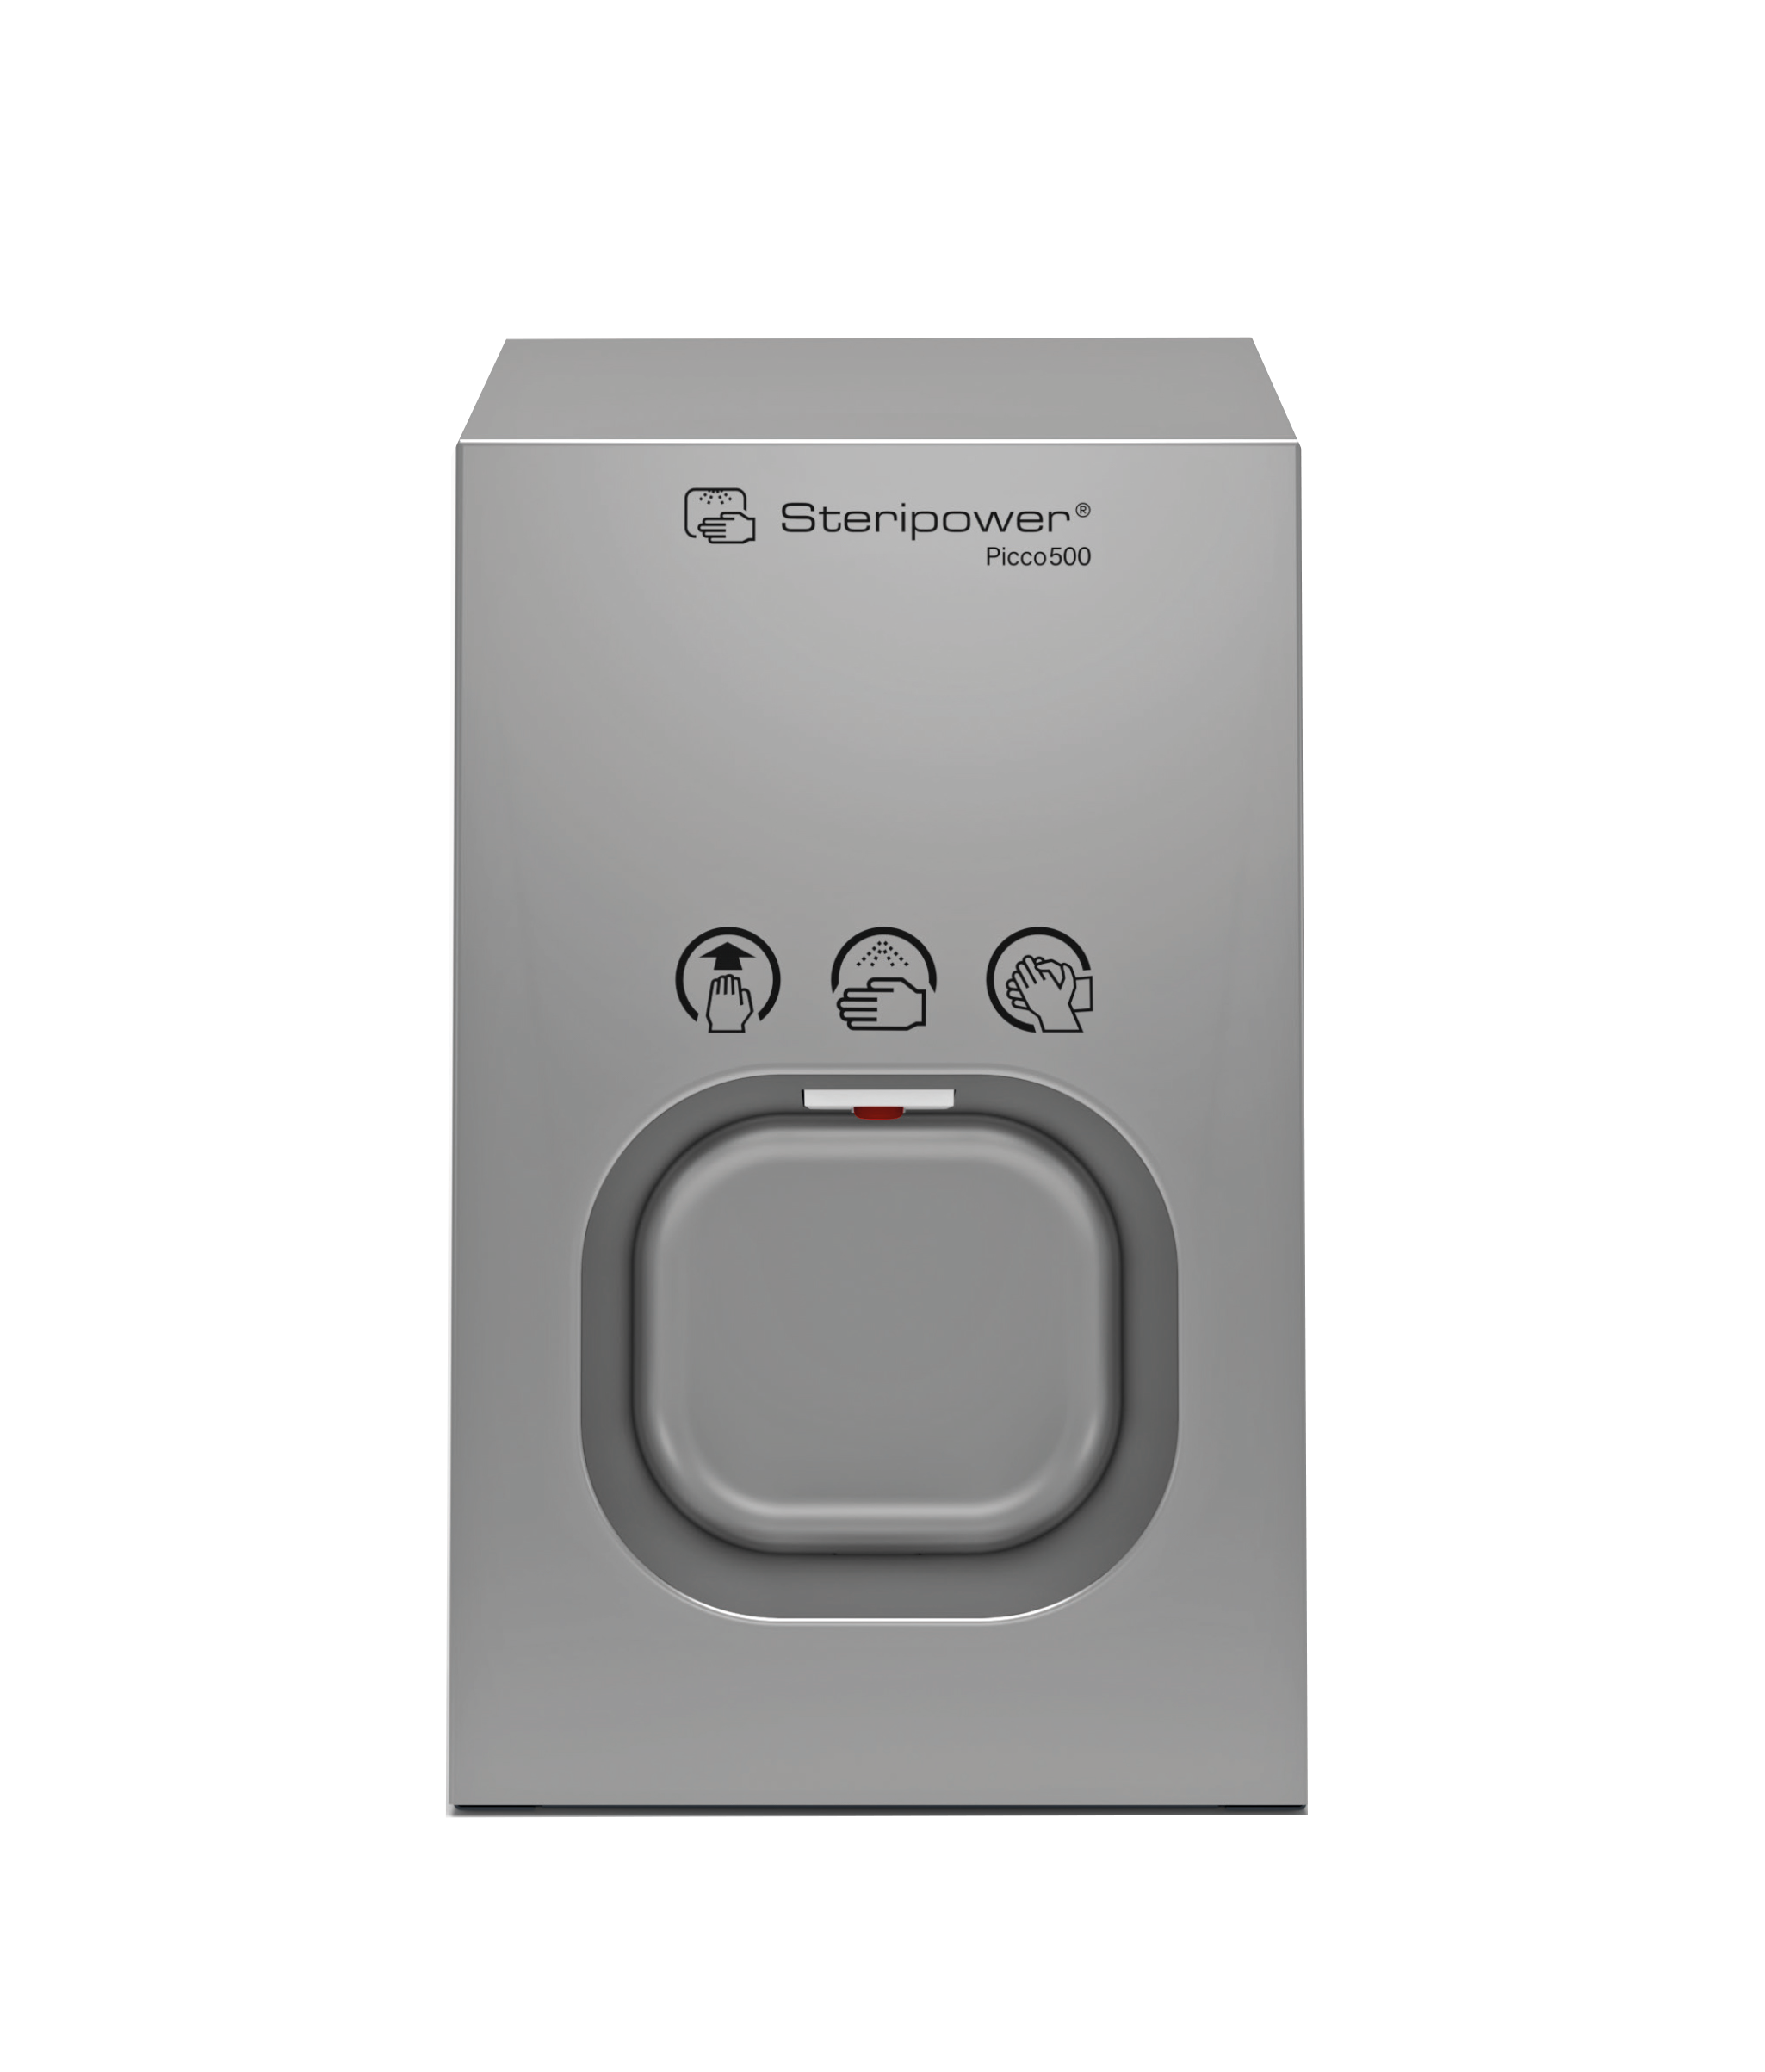 Steripower© - Worldwide patented touchless hand disinfection units and sprayer